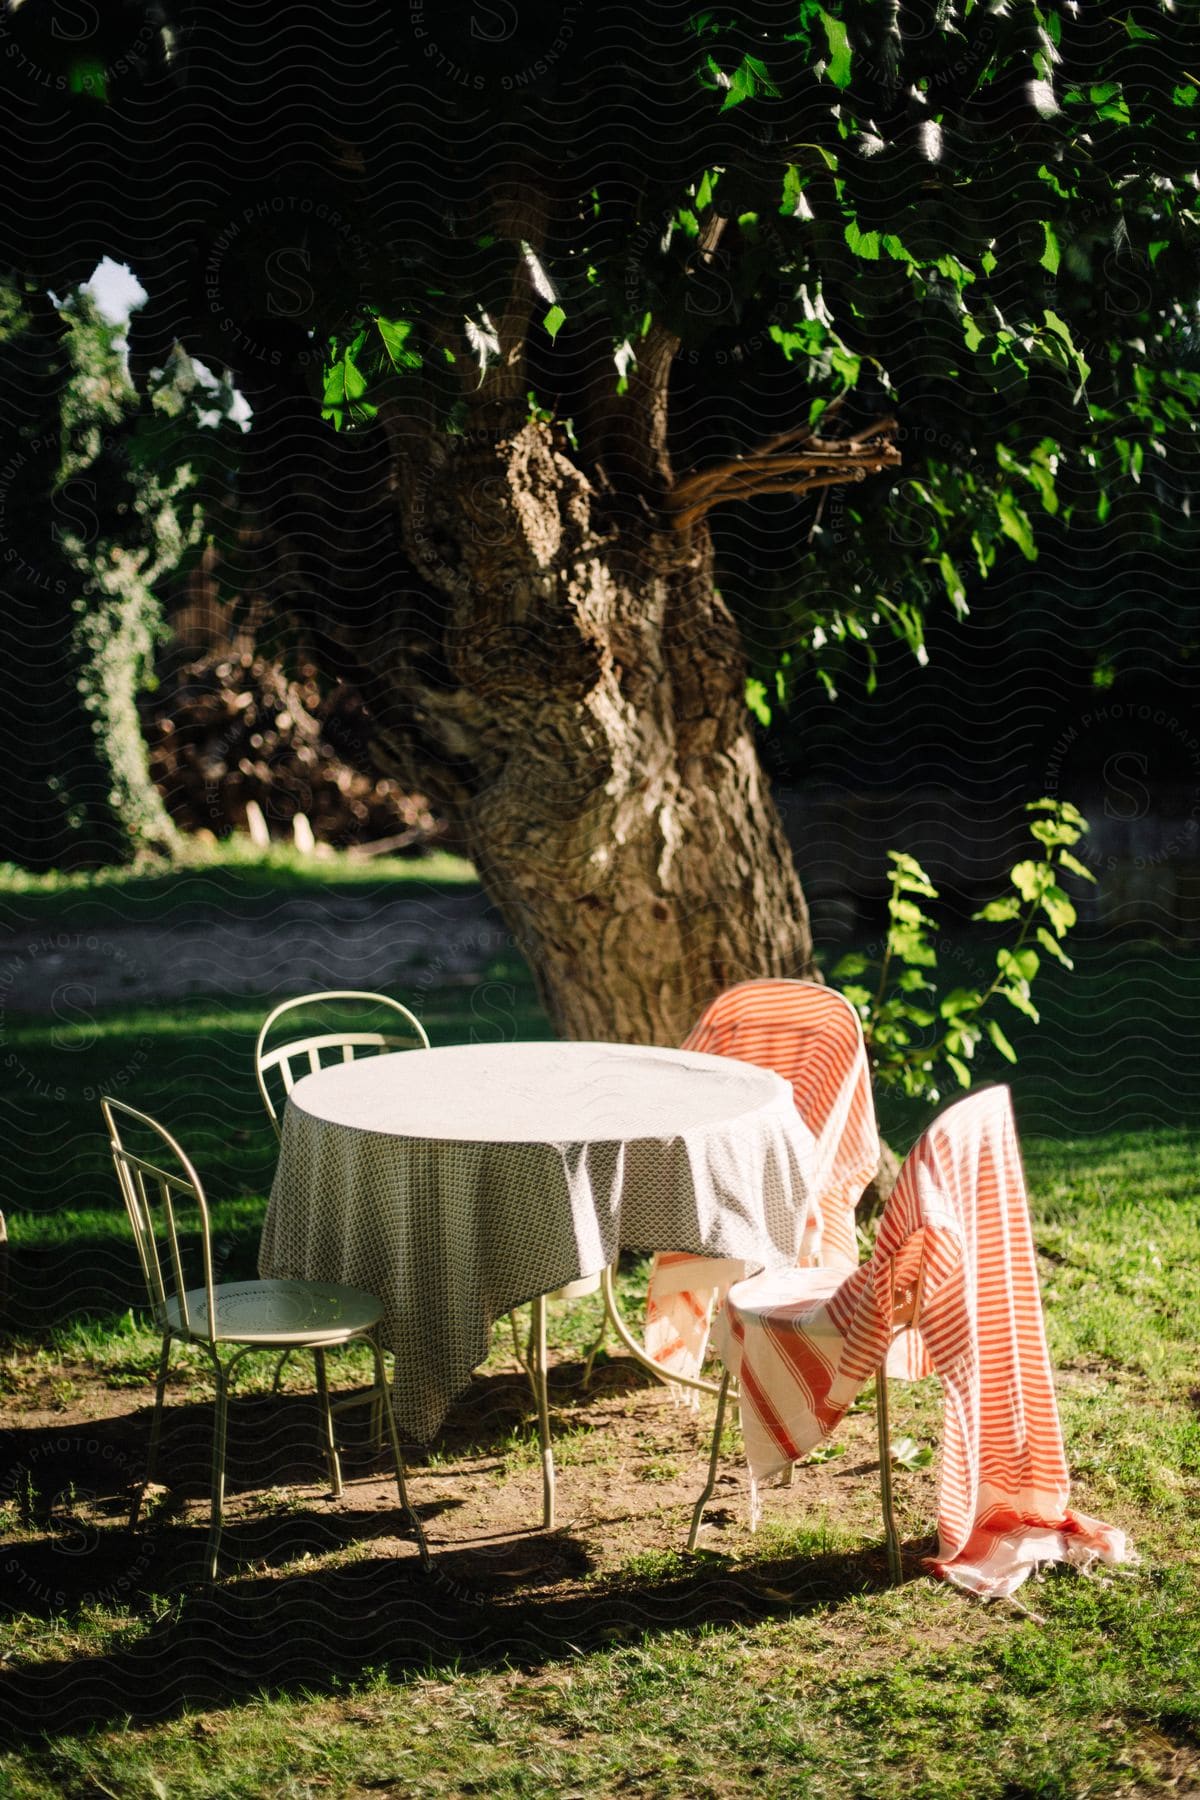 Tablecloth on a round table and chairs set up near a tree